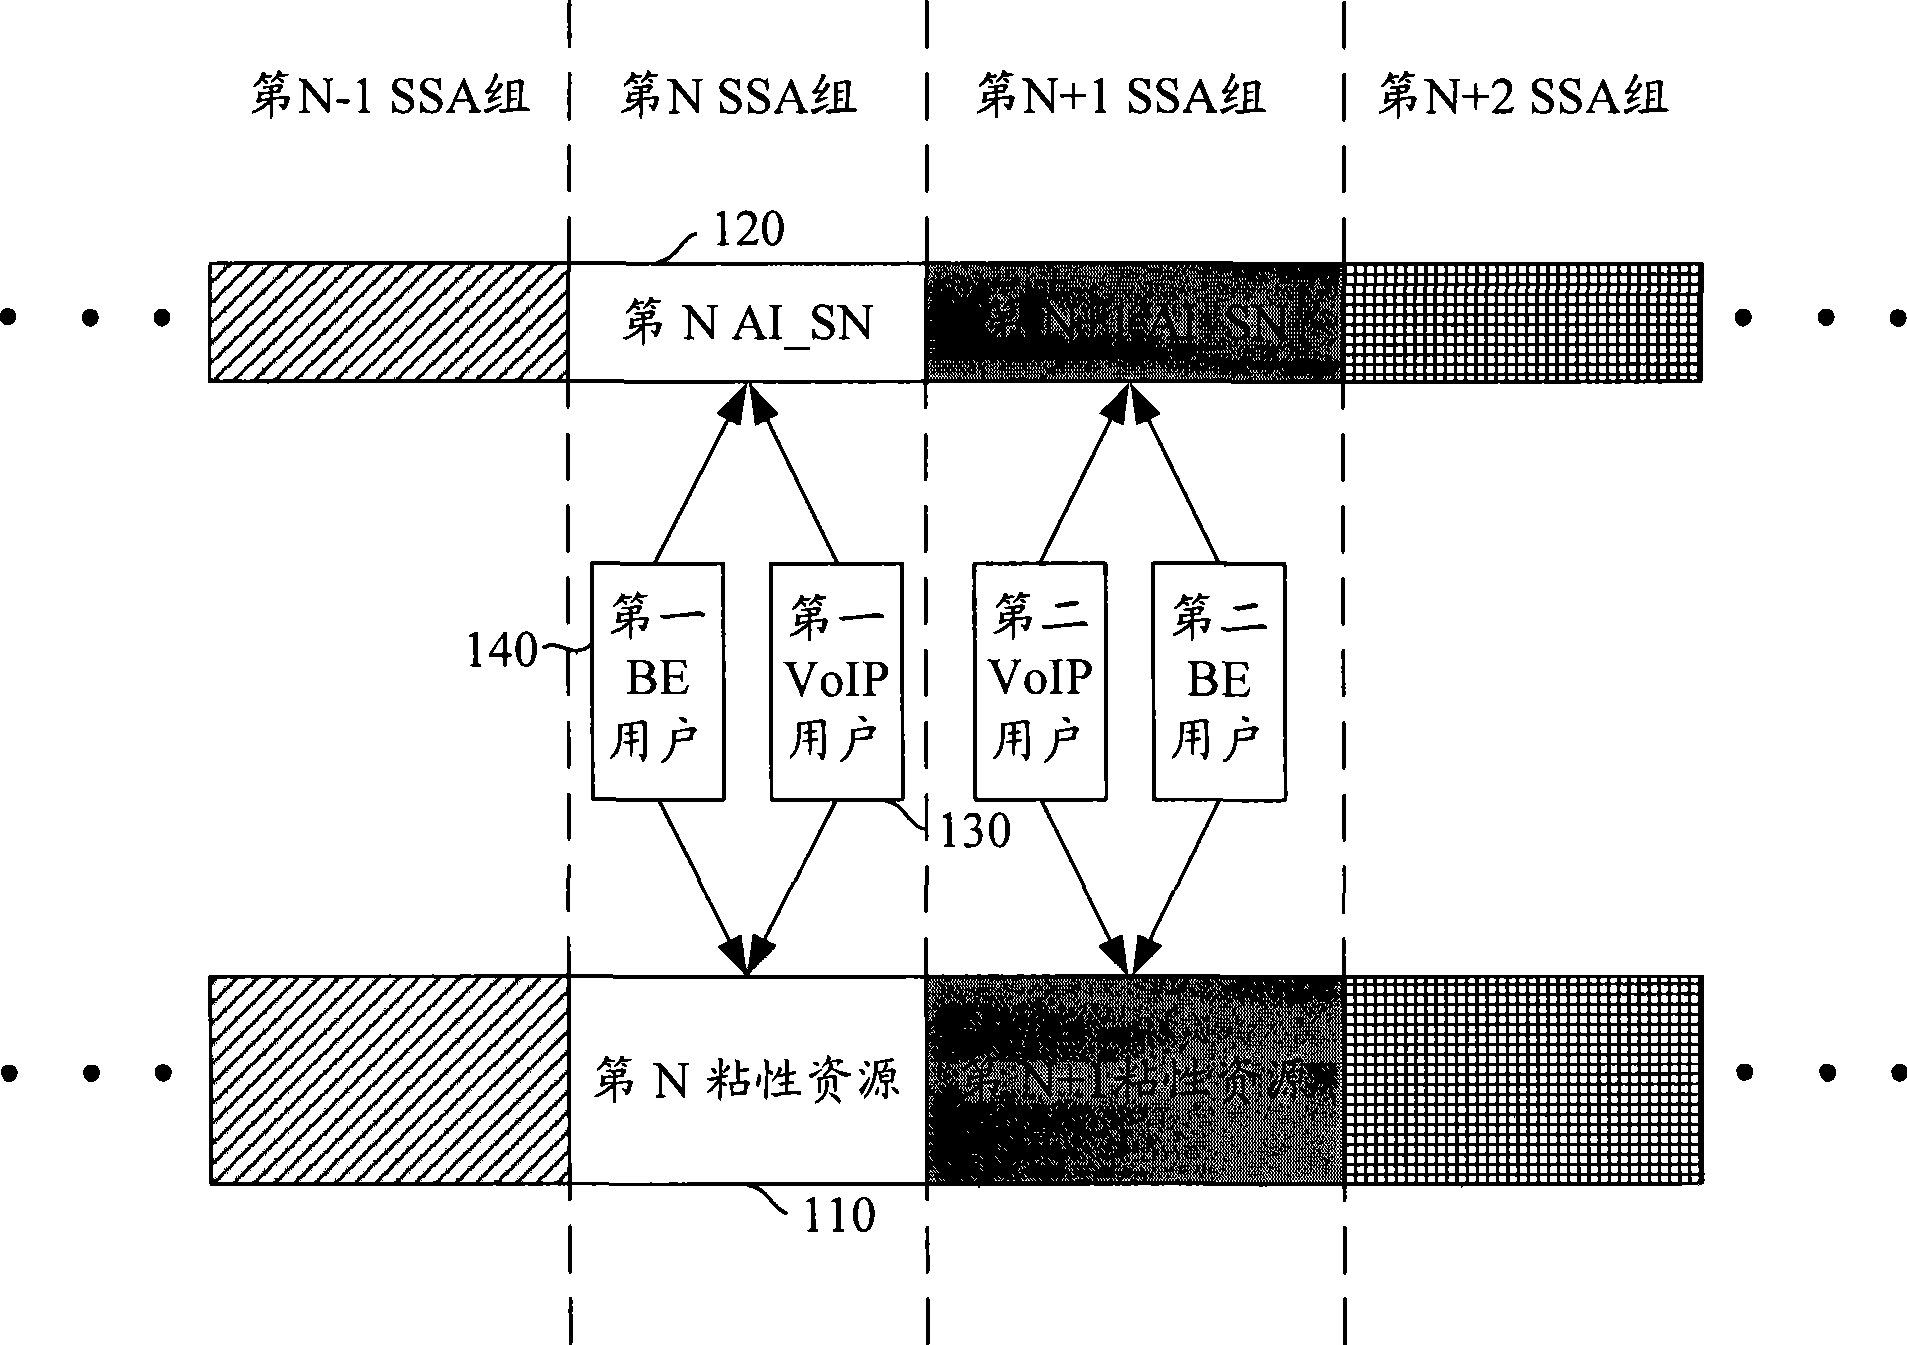 Method and apparatus for sharing radio resources in a wireless communications system